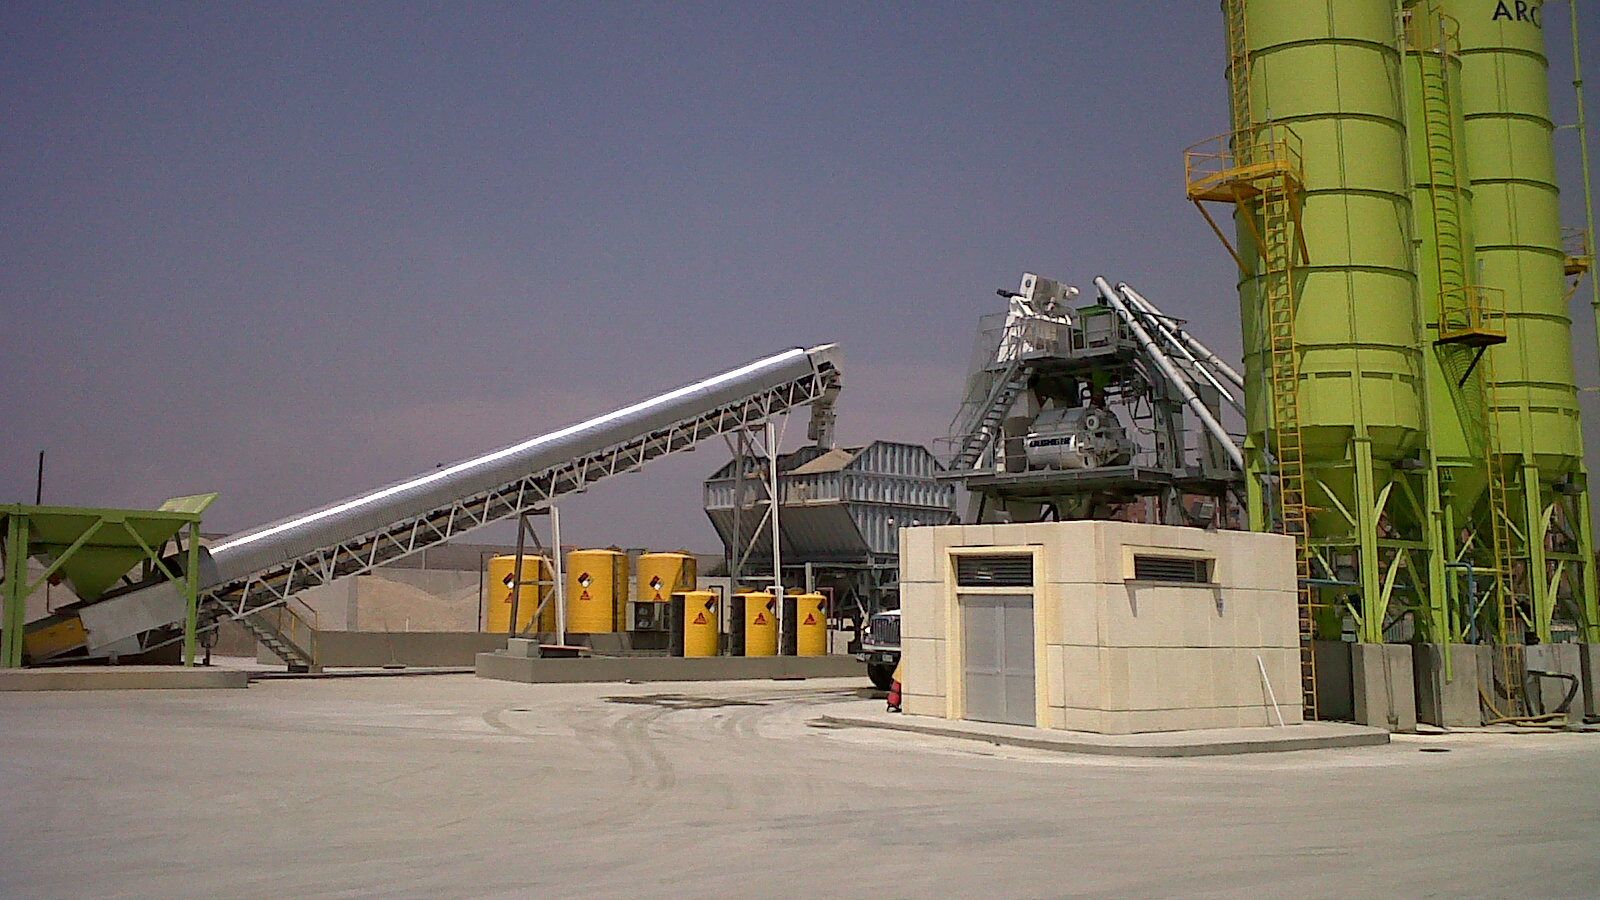 Concrete batching plant using Sika admixtures for ready mix concrete production